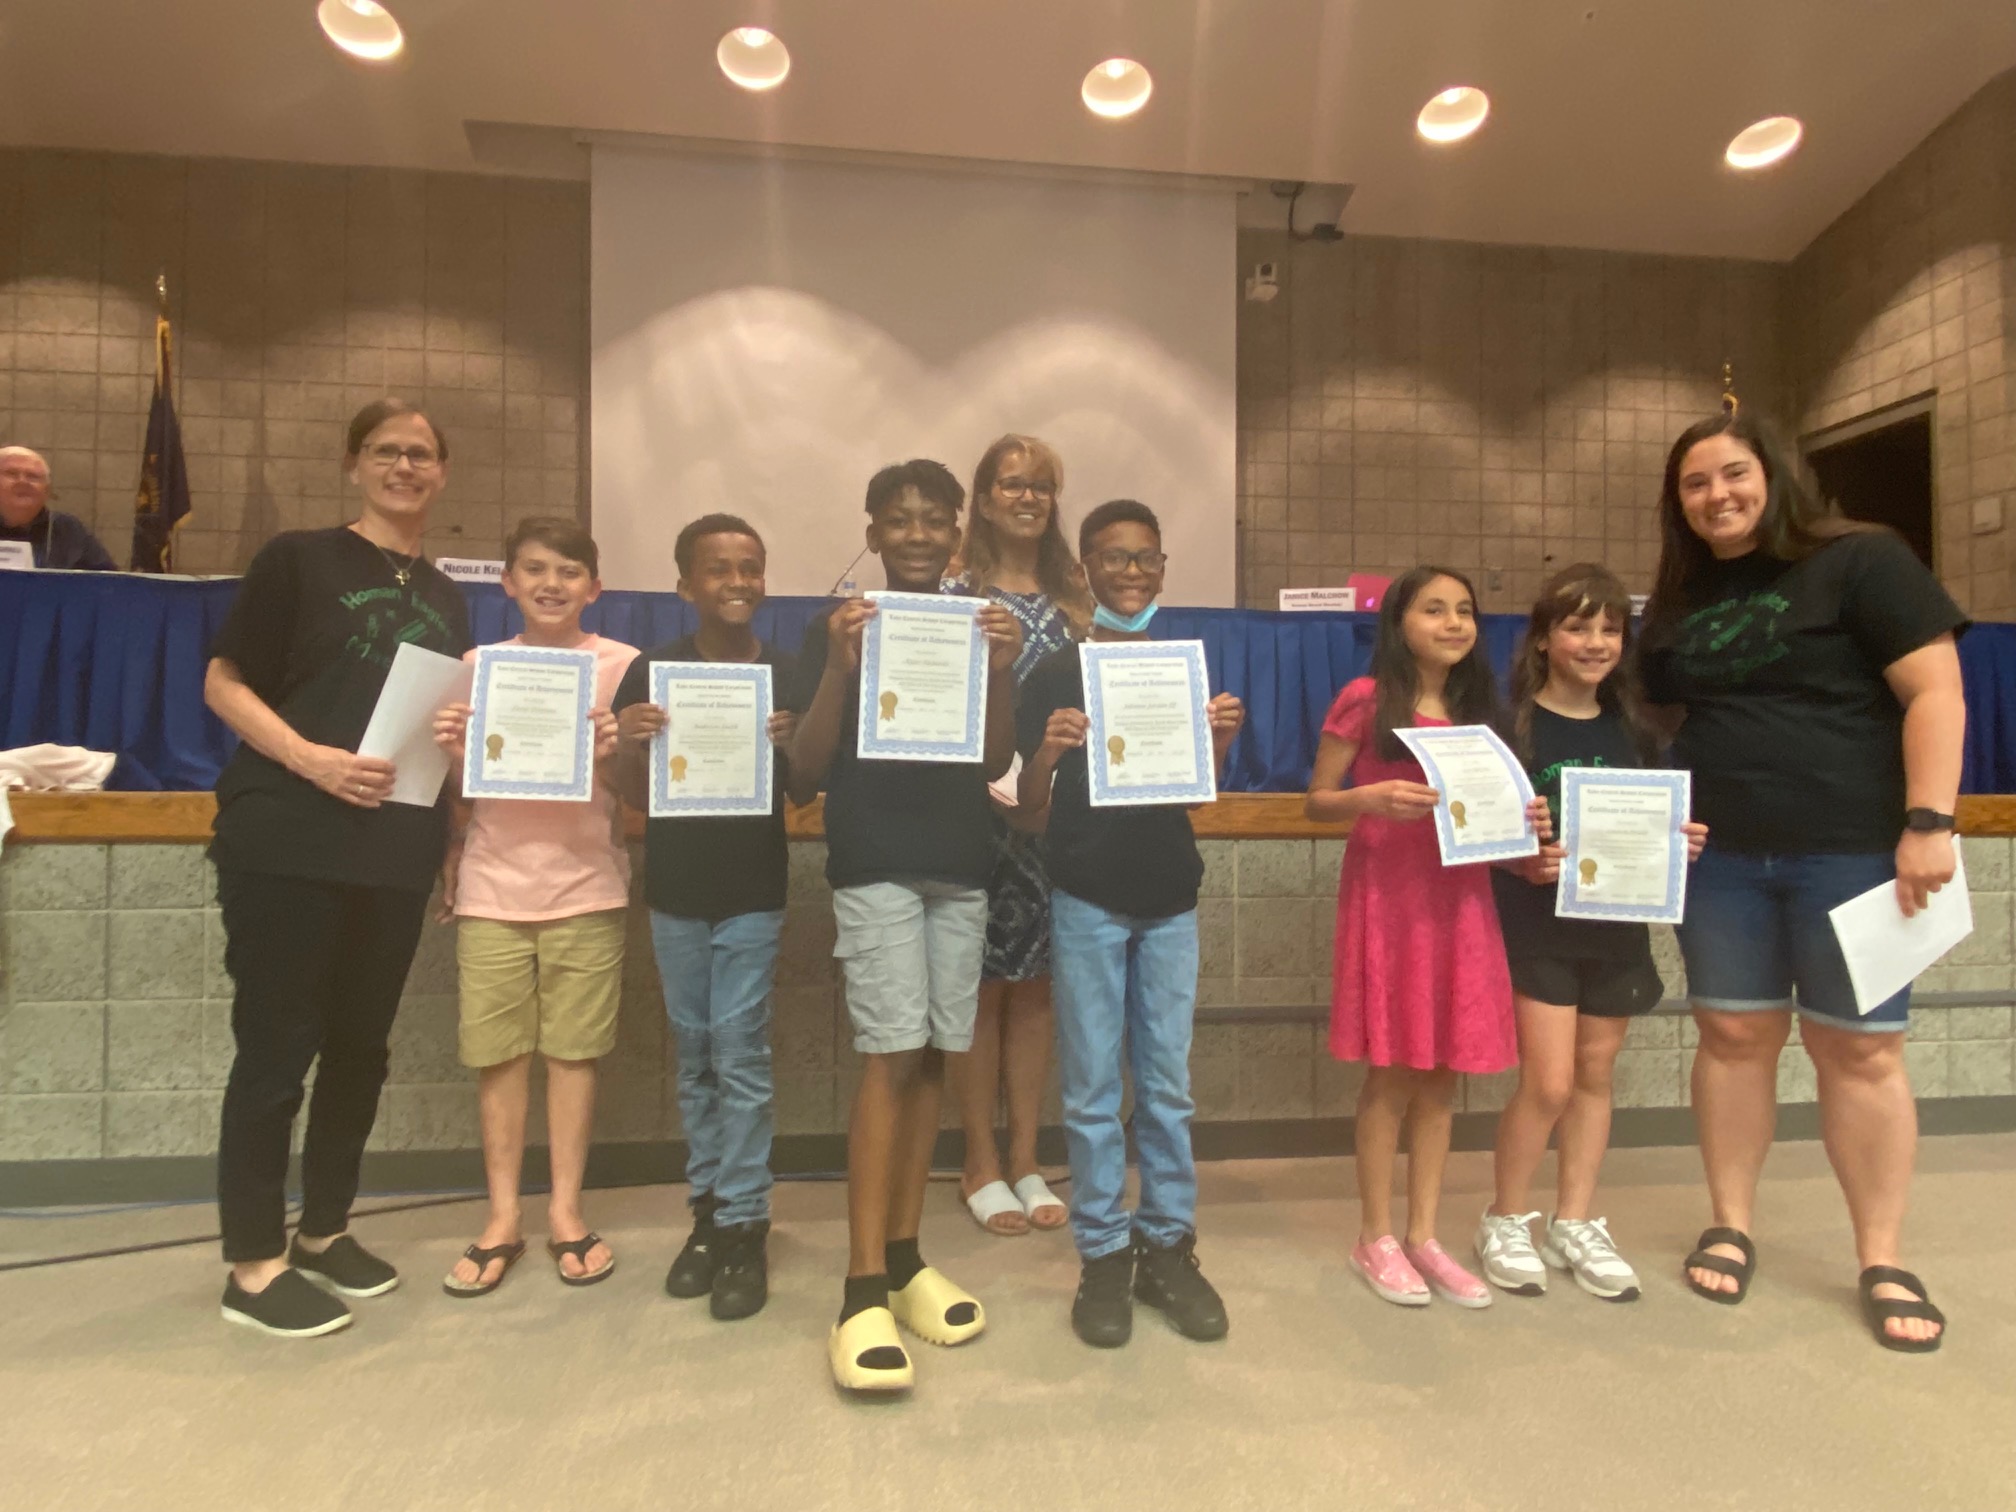 Homan's Math Bowl members placed 8th at the State level! Members are pictured at the Board meeting with their coaches Ms. Malatestinic and Ms. Miljevic.